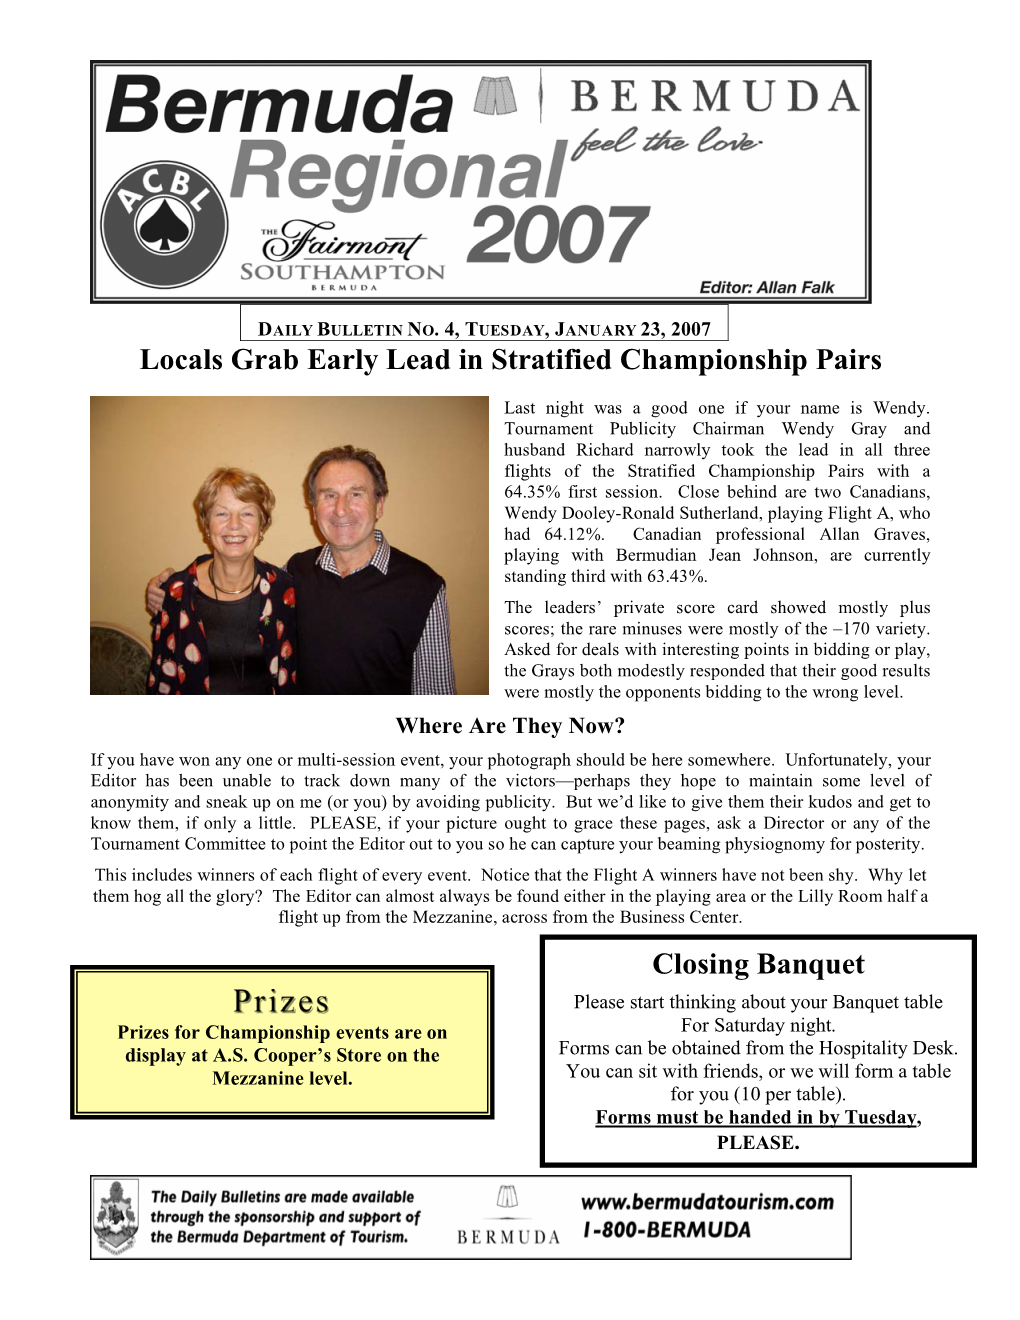 Locals Grab Early Lead in Stratified Championship Pairs